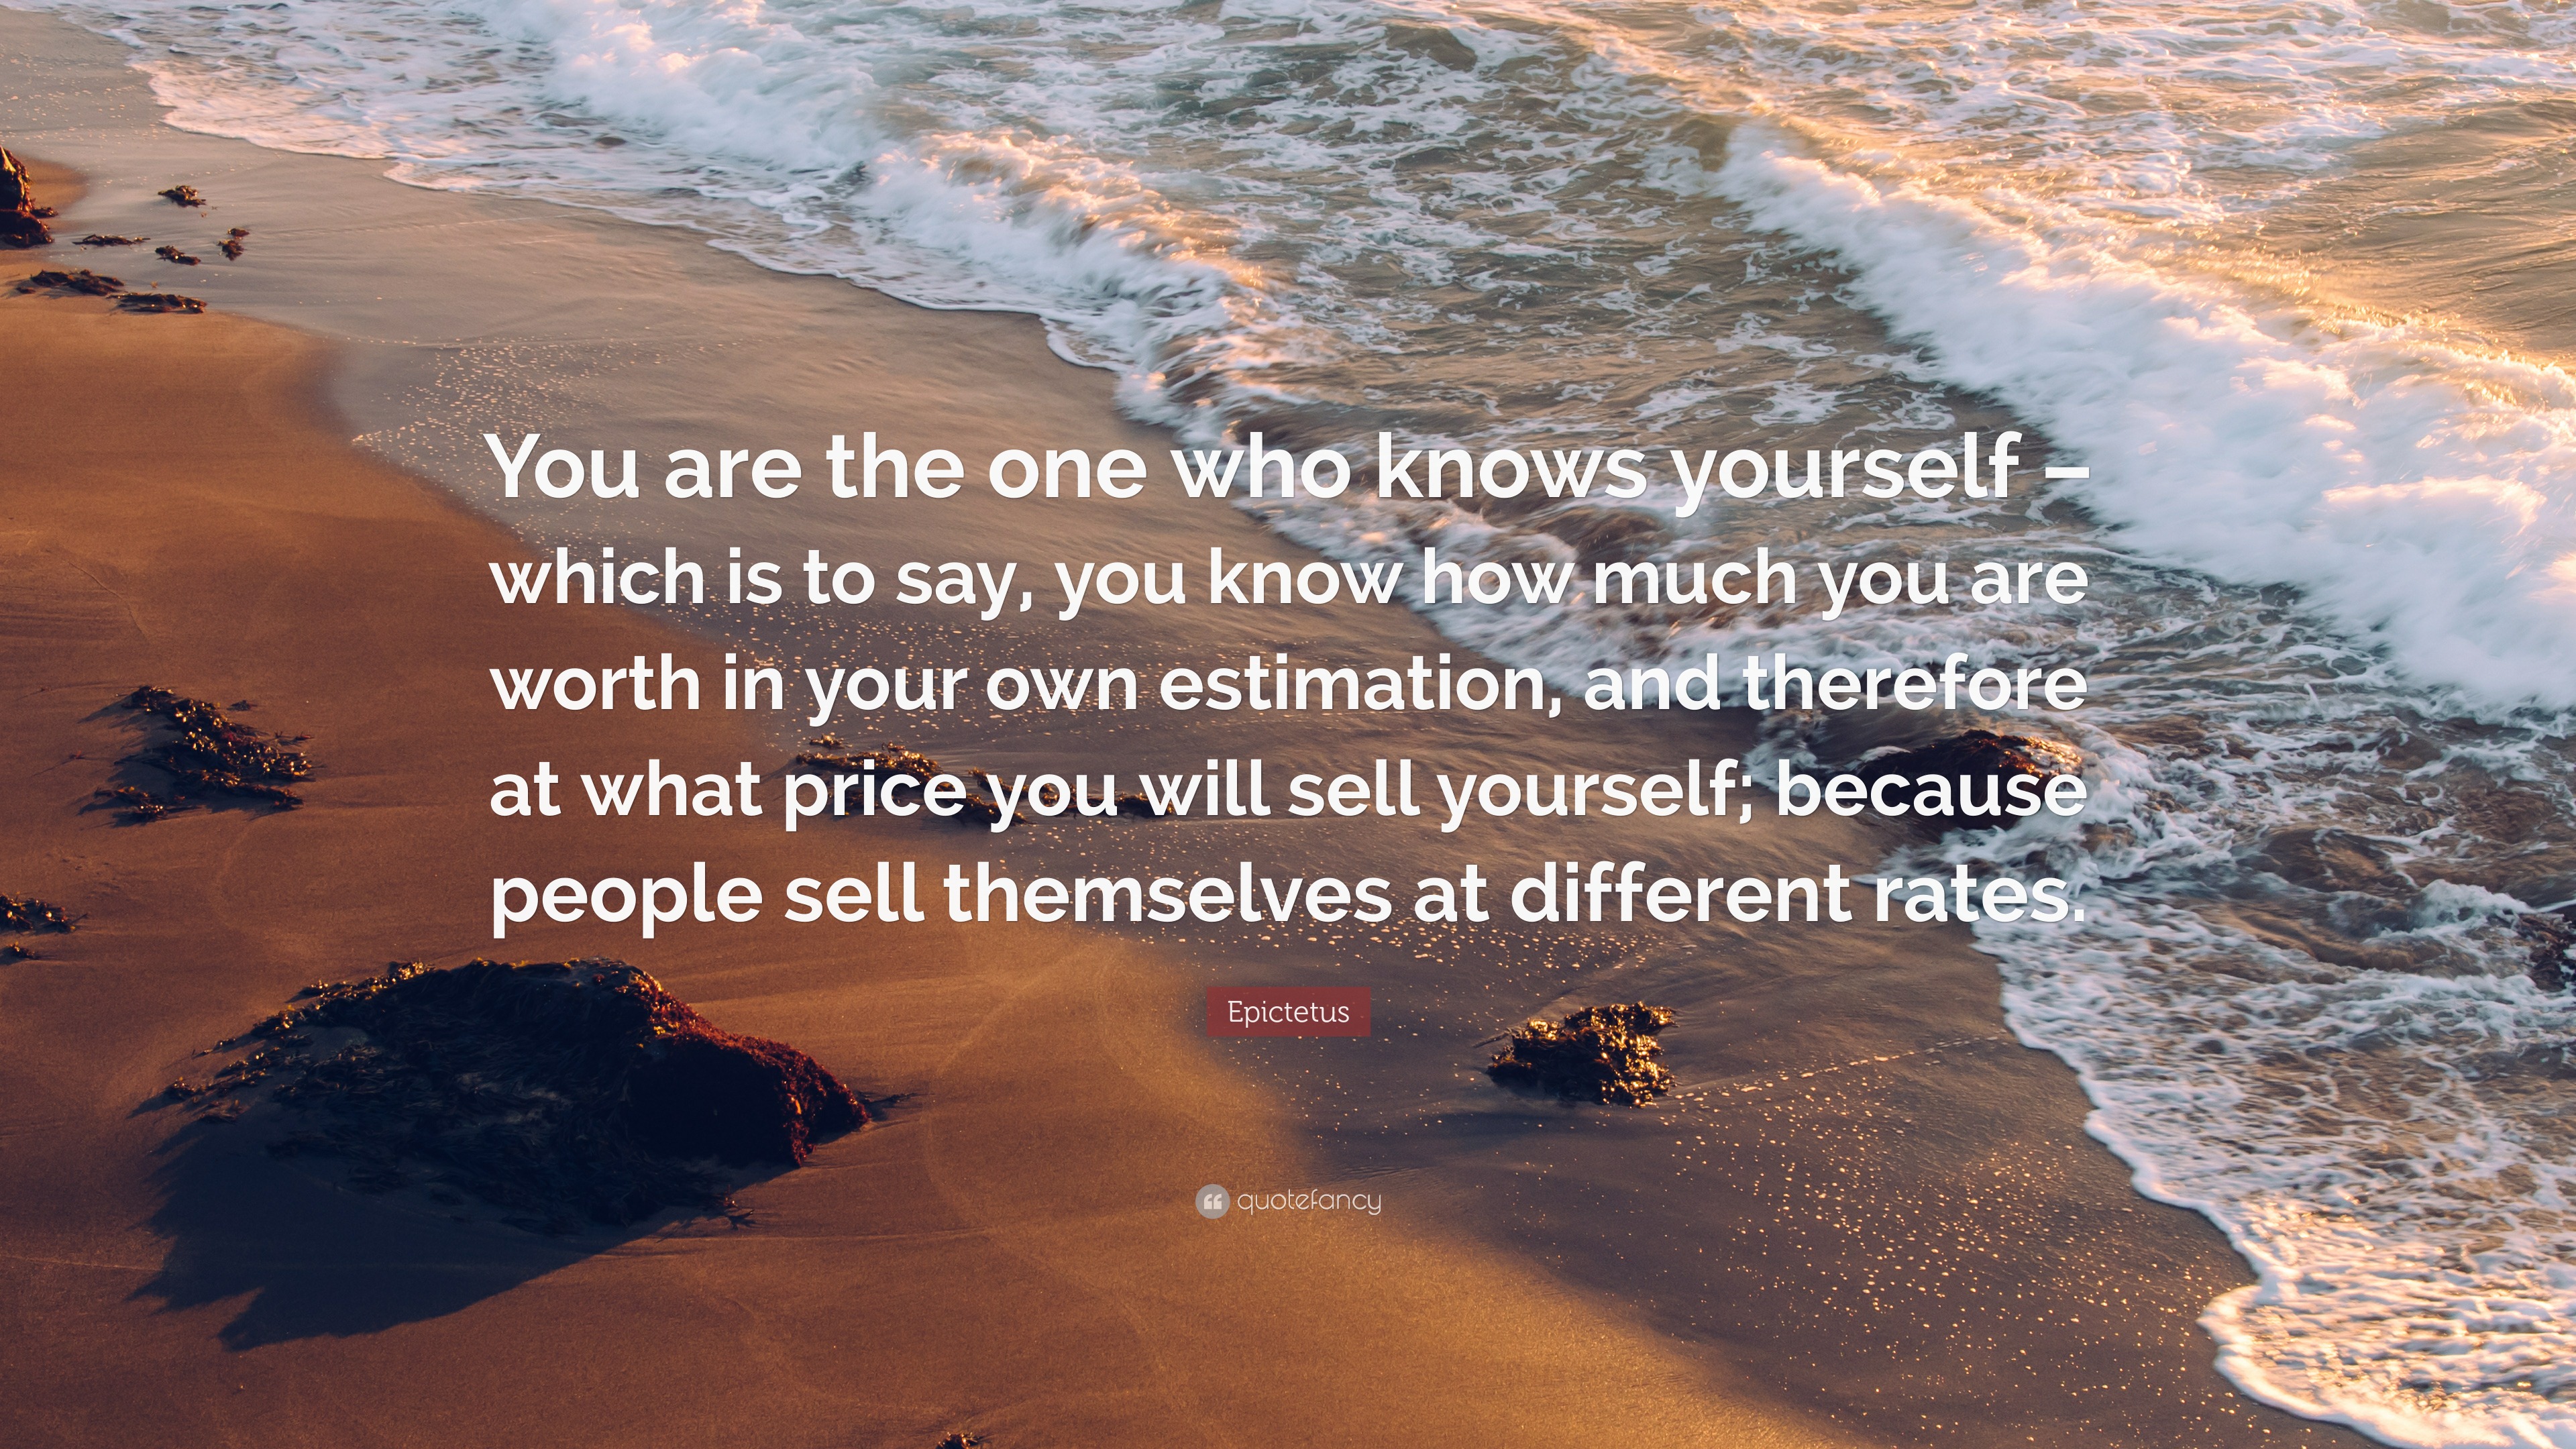 Epictetus Quote: “You are the one who knows yourself – which is to say ...